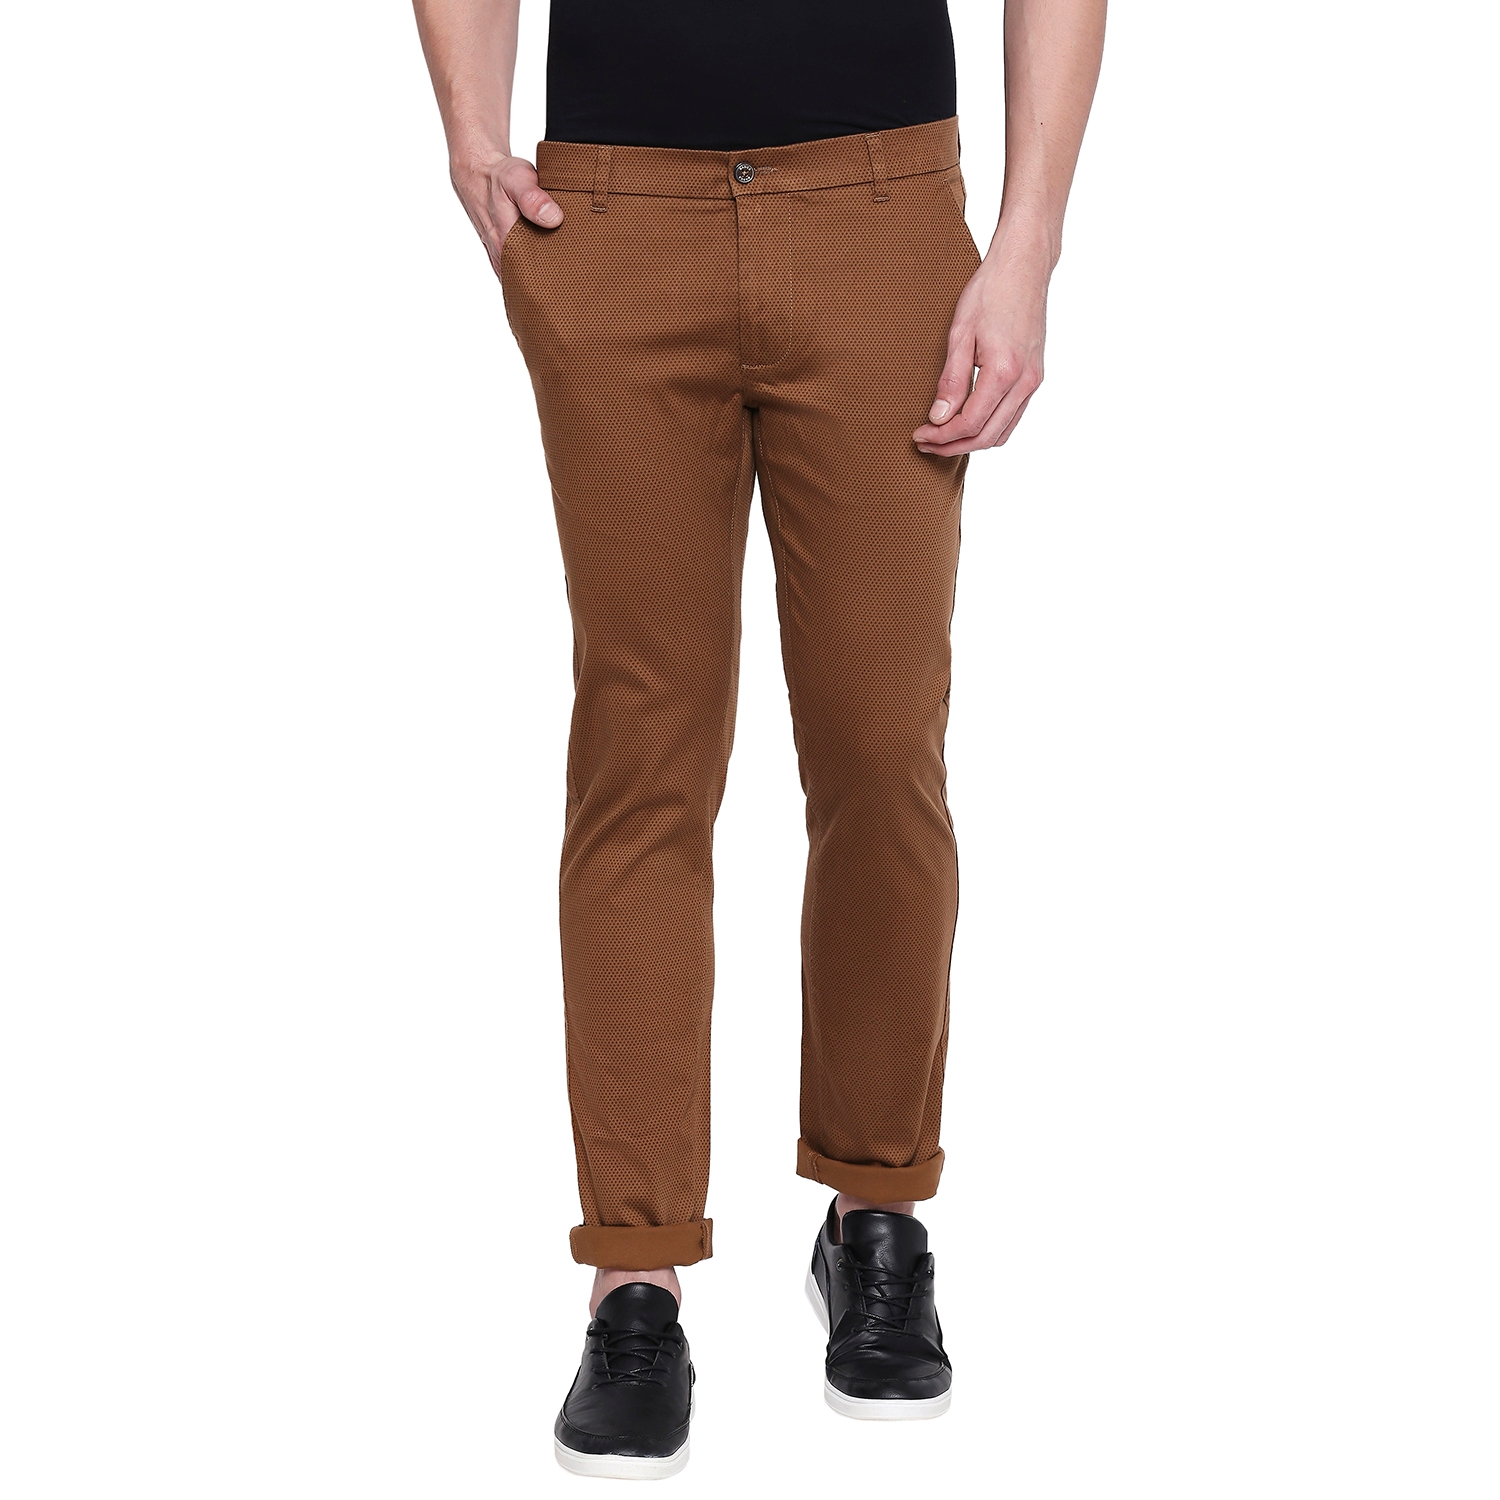 Basics Tapered Fit Dachshund Printed Stretch Trouser